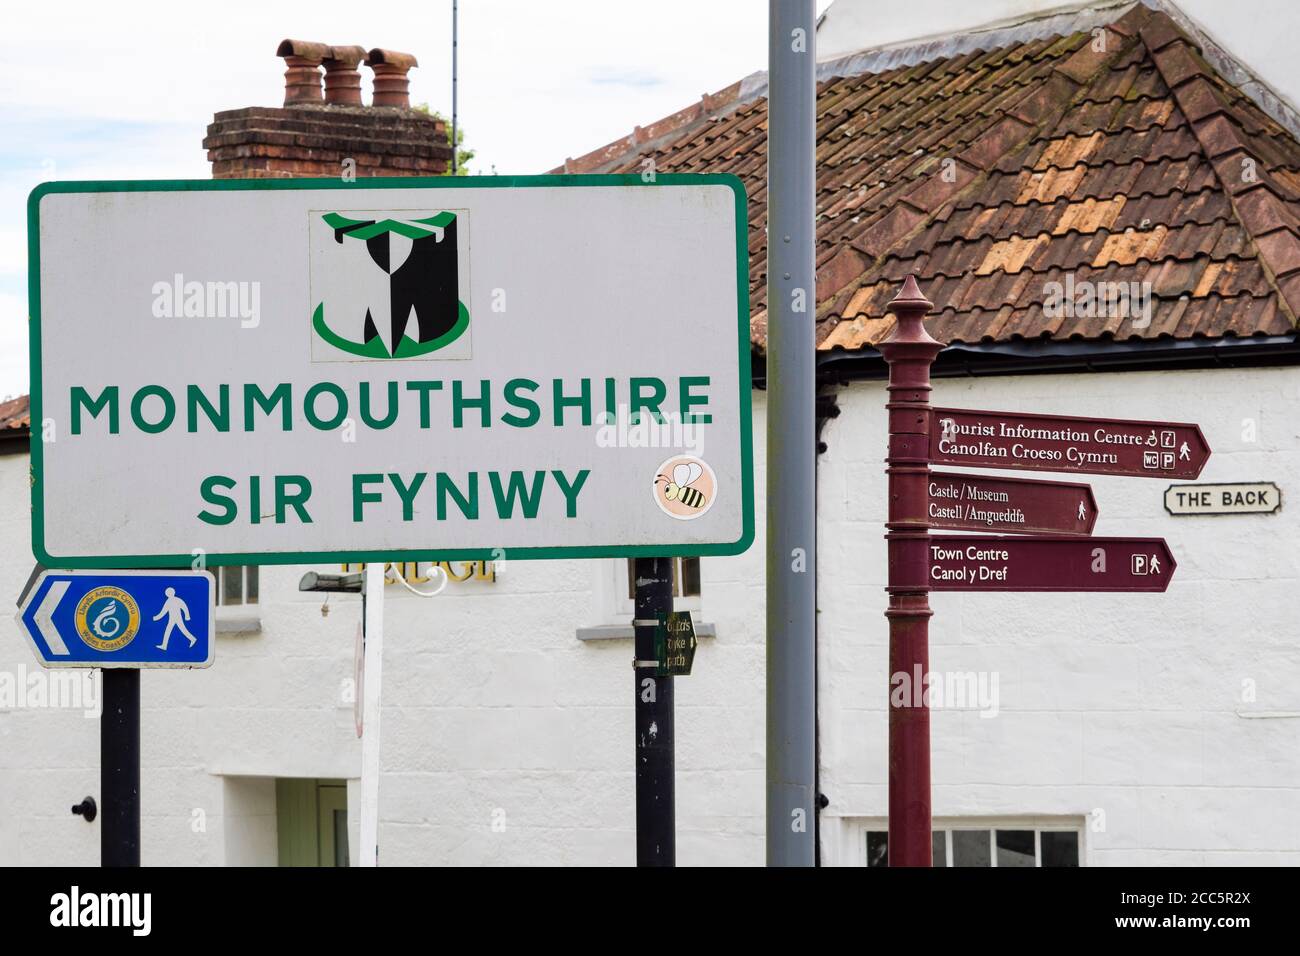 Bilingual county boundary name sign in English and Welsh. Chepstow, Monmouthshire / Sir Fynwy, Wales, UK, Britain Stock Photo